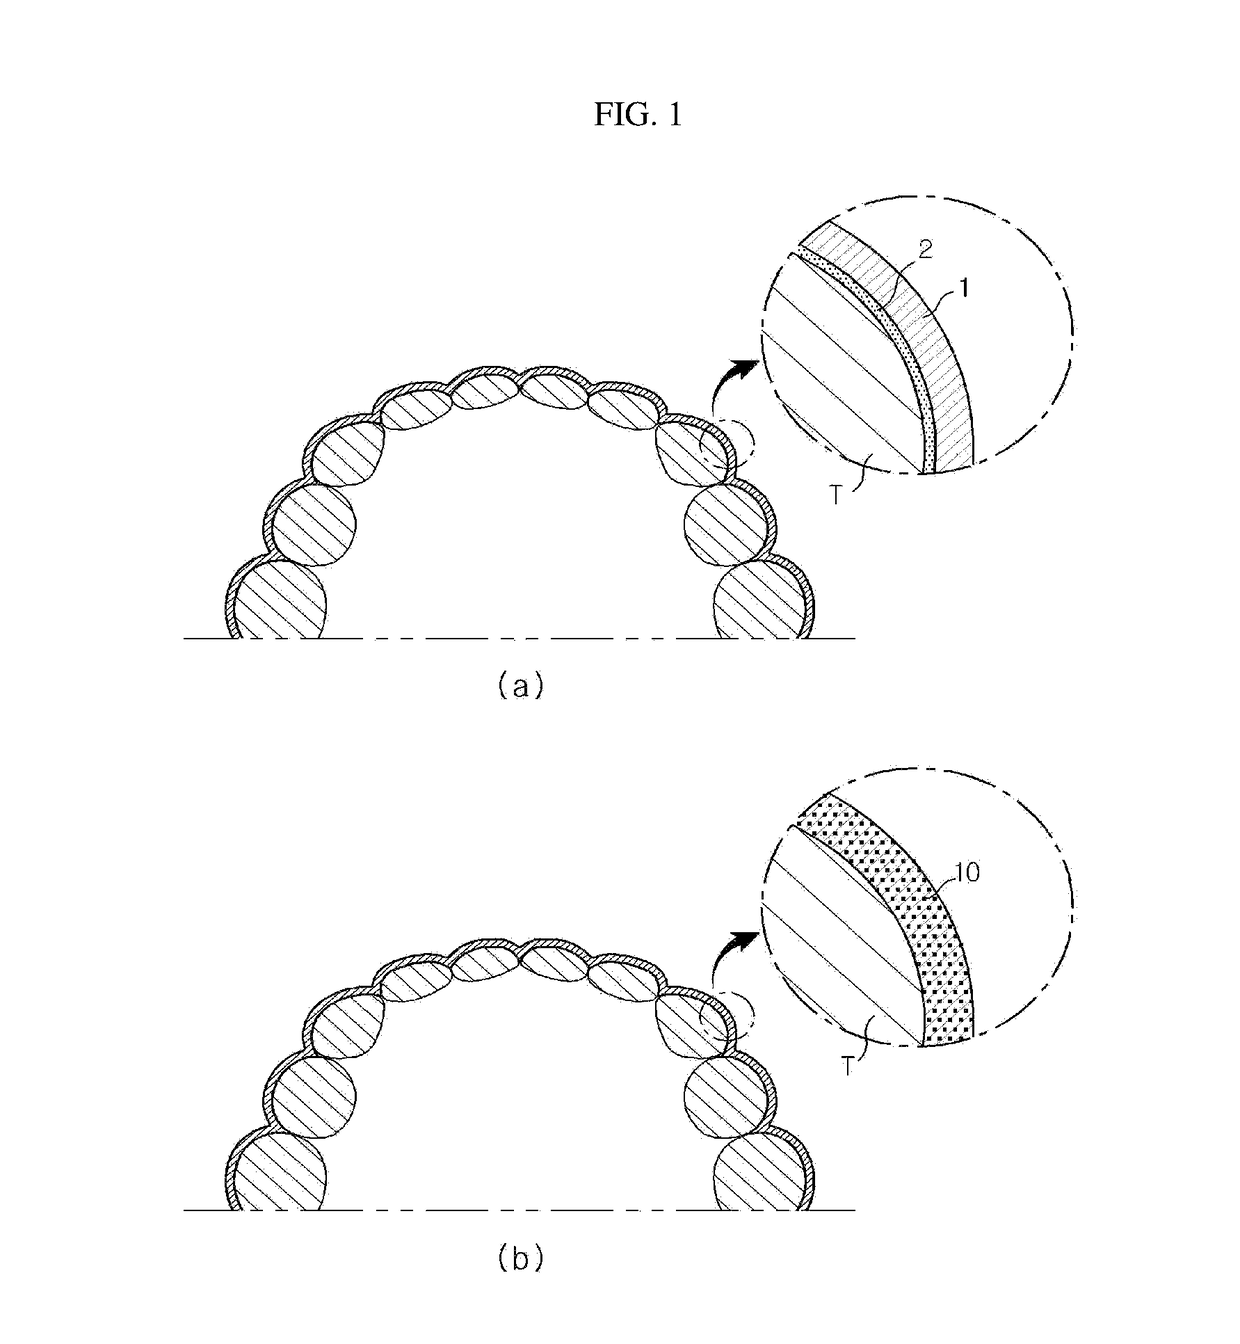 Preparation for attaching to teeth or surrounding part of teeth